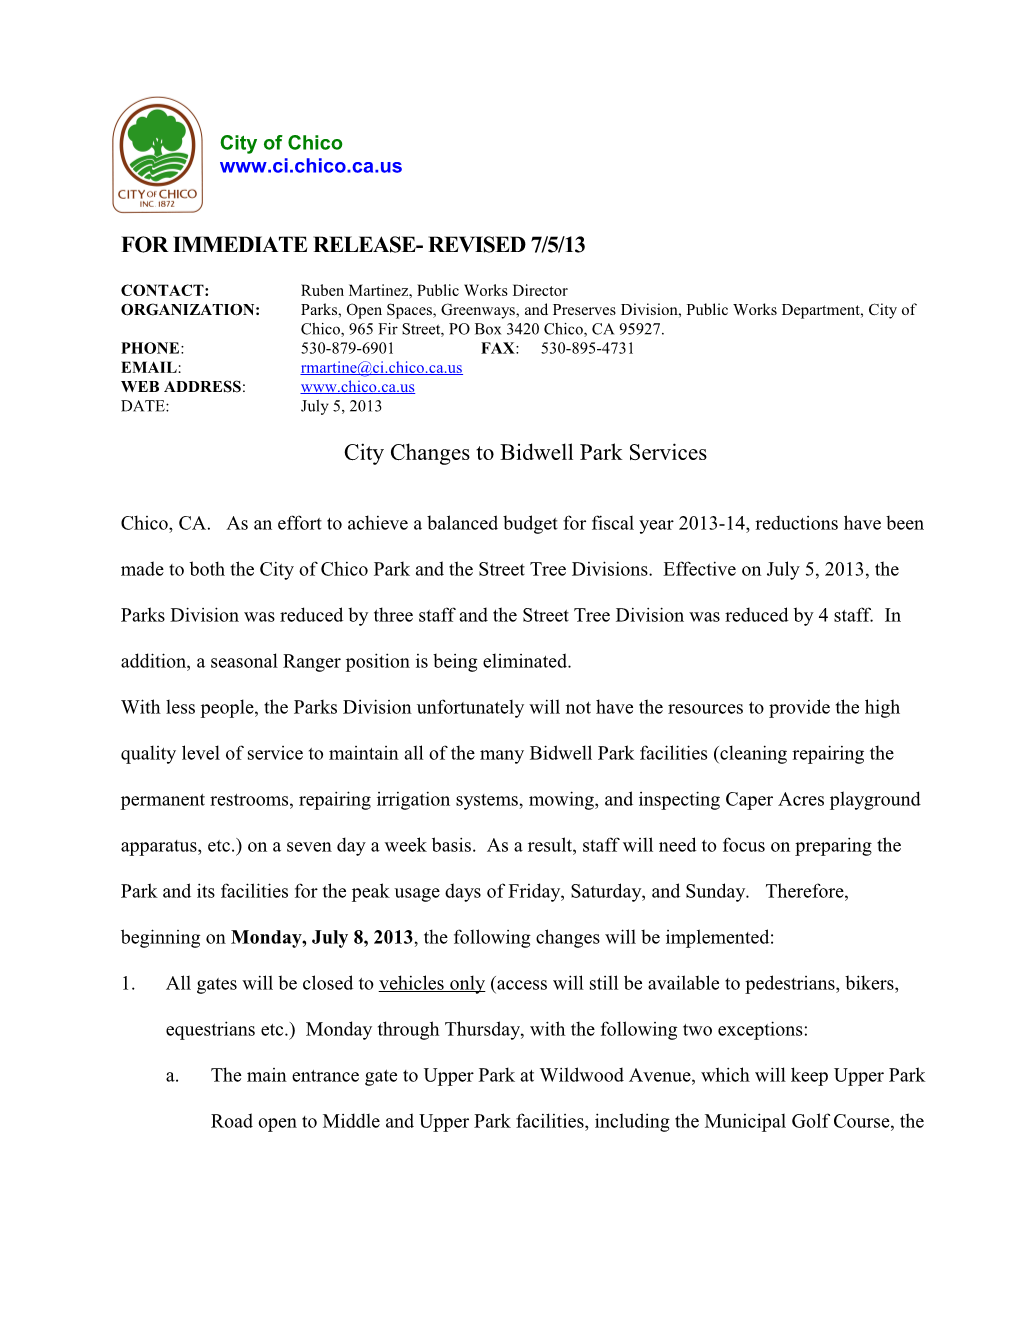 Chico Parks Press Release